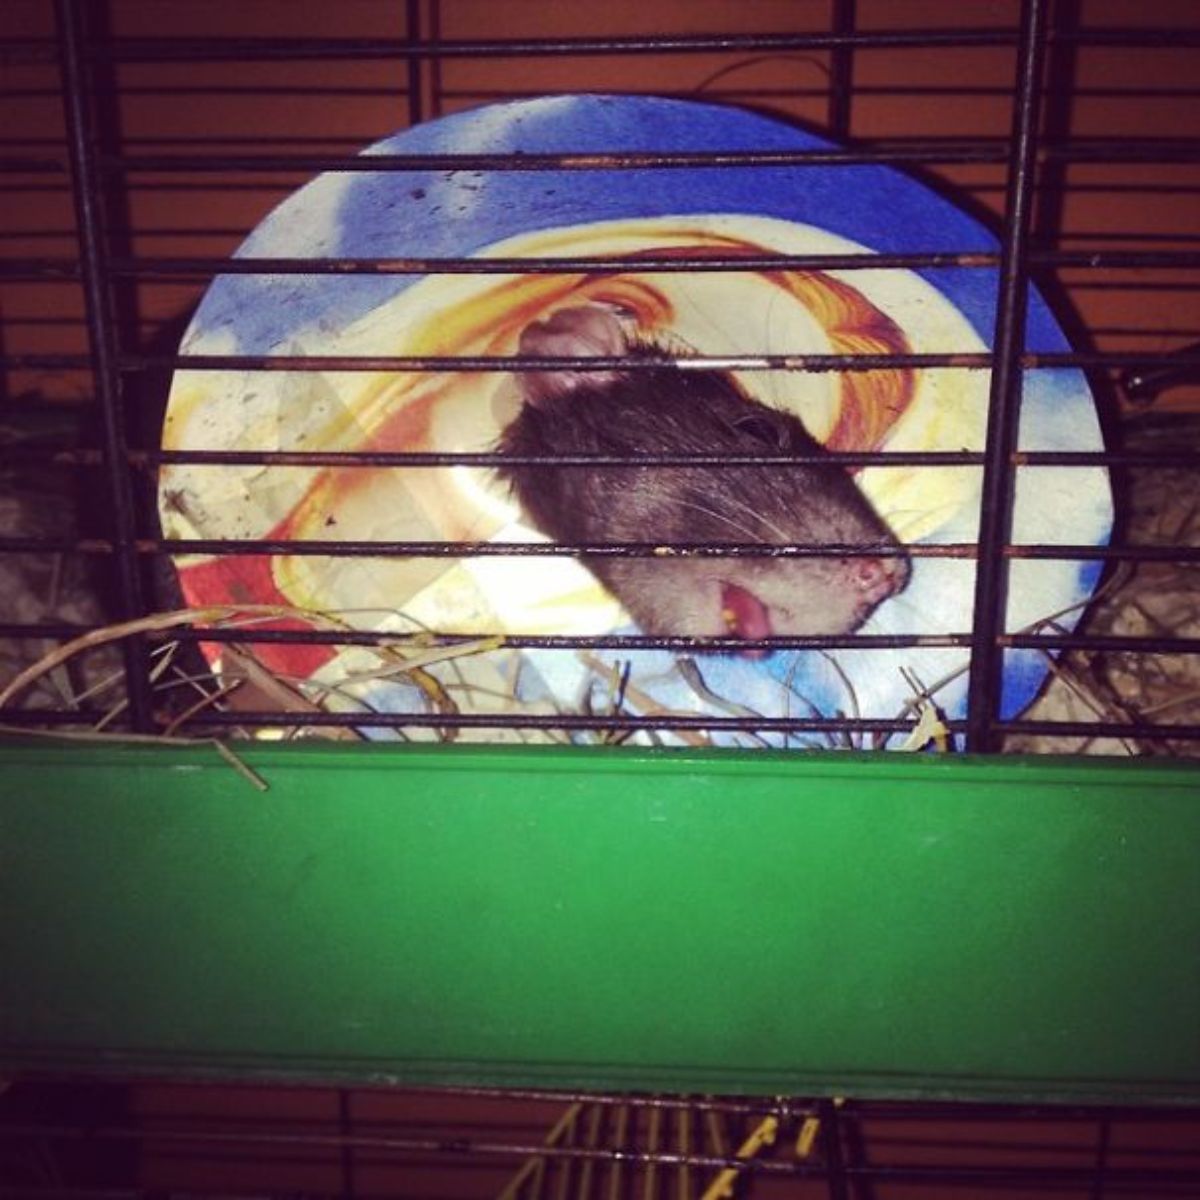 sleeping brown rat in a green and black cage wearing a cone with Jesus' face on it